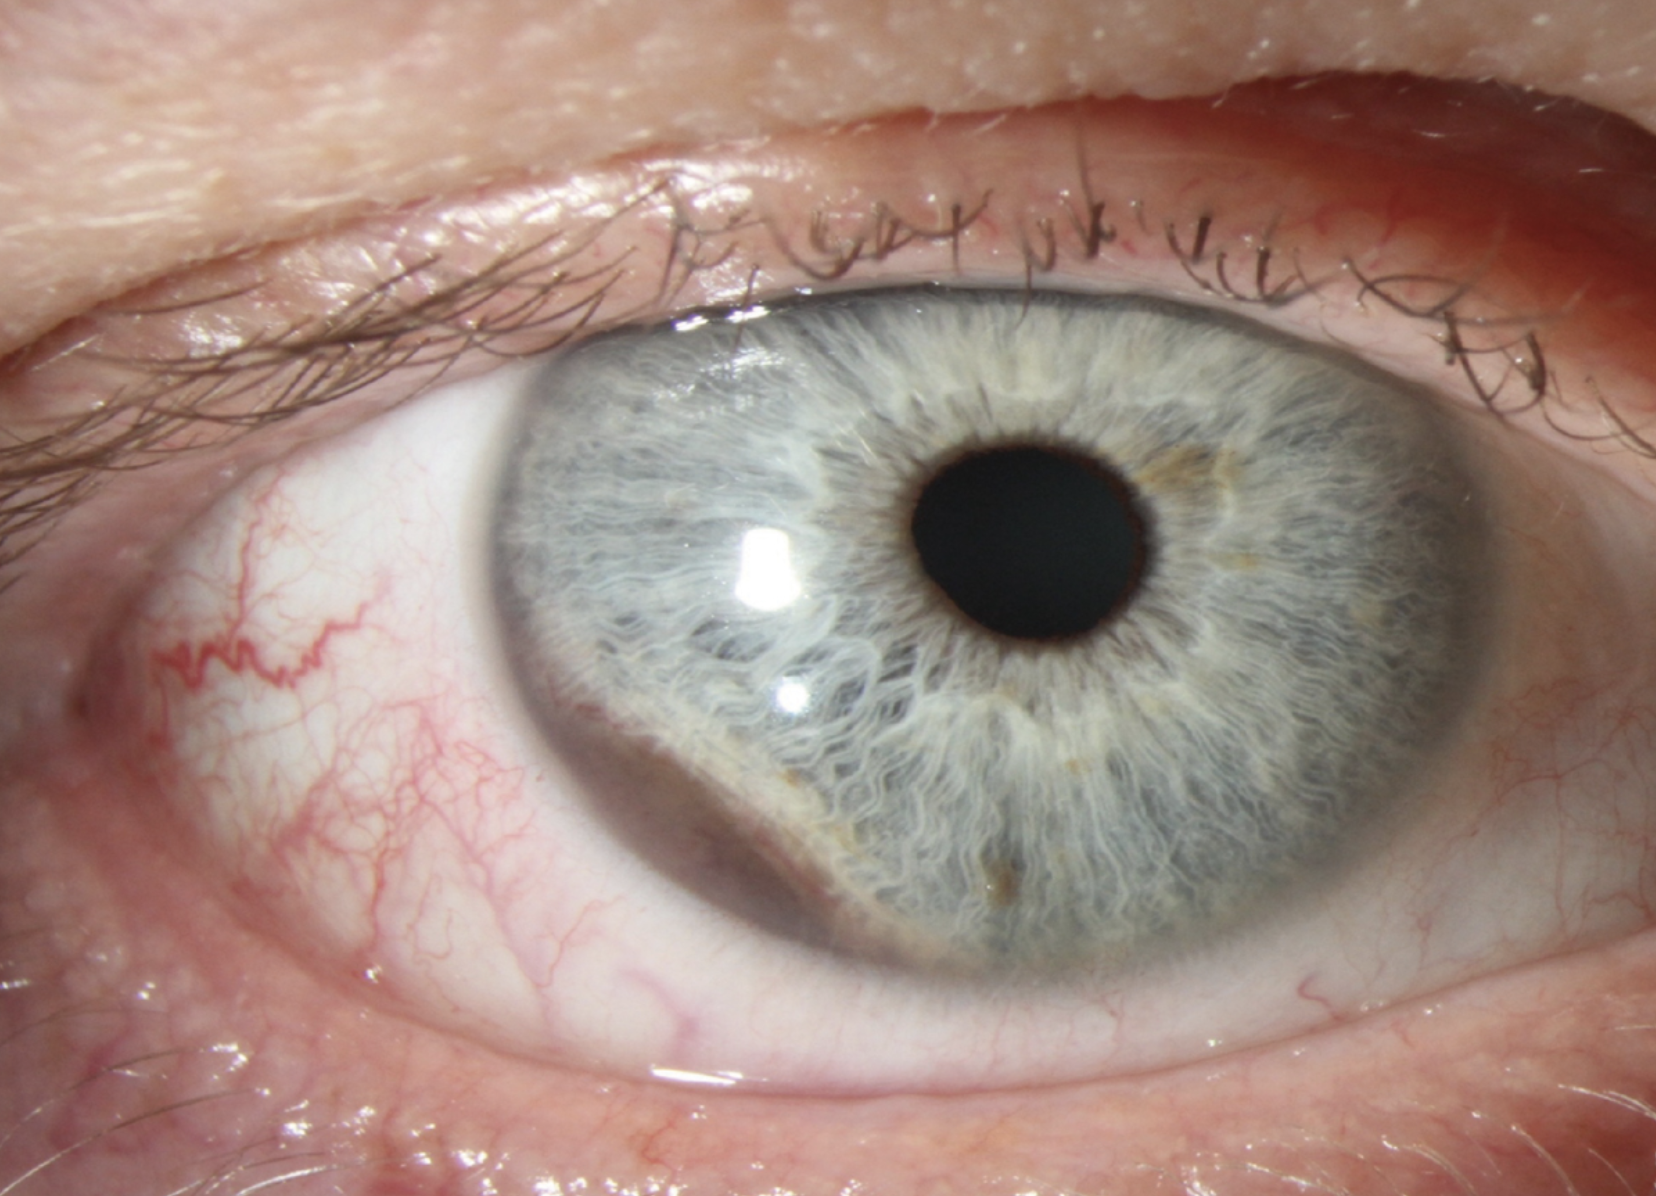 The anterior segment absorbs more ultraviolet radiation than the back of the eye, which may be why this study observed an increased risk of ciliary body/iris melanoma in those living in areas of high exposure.